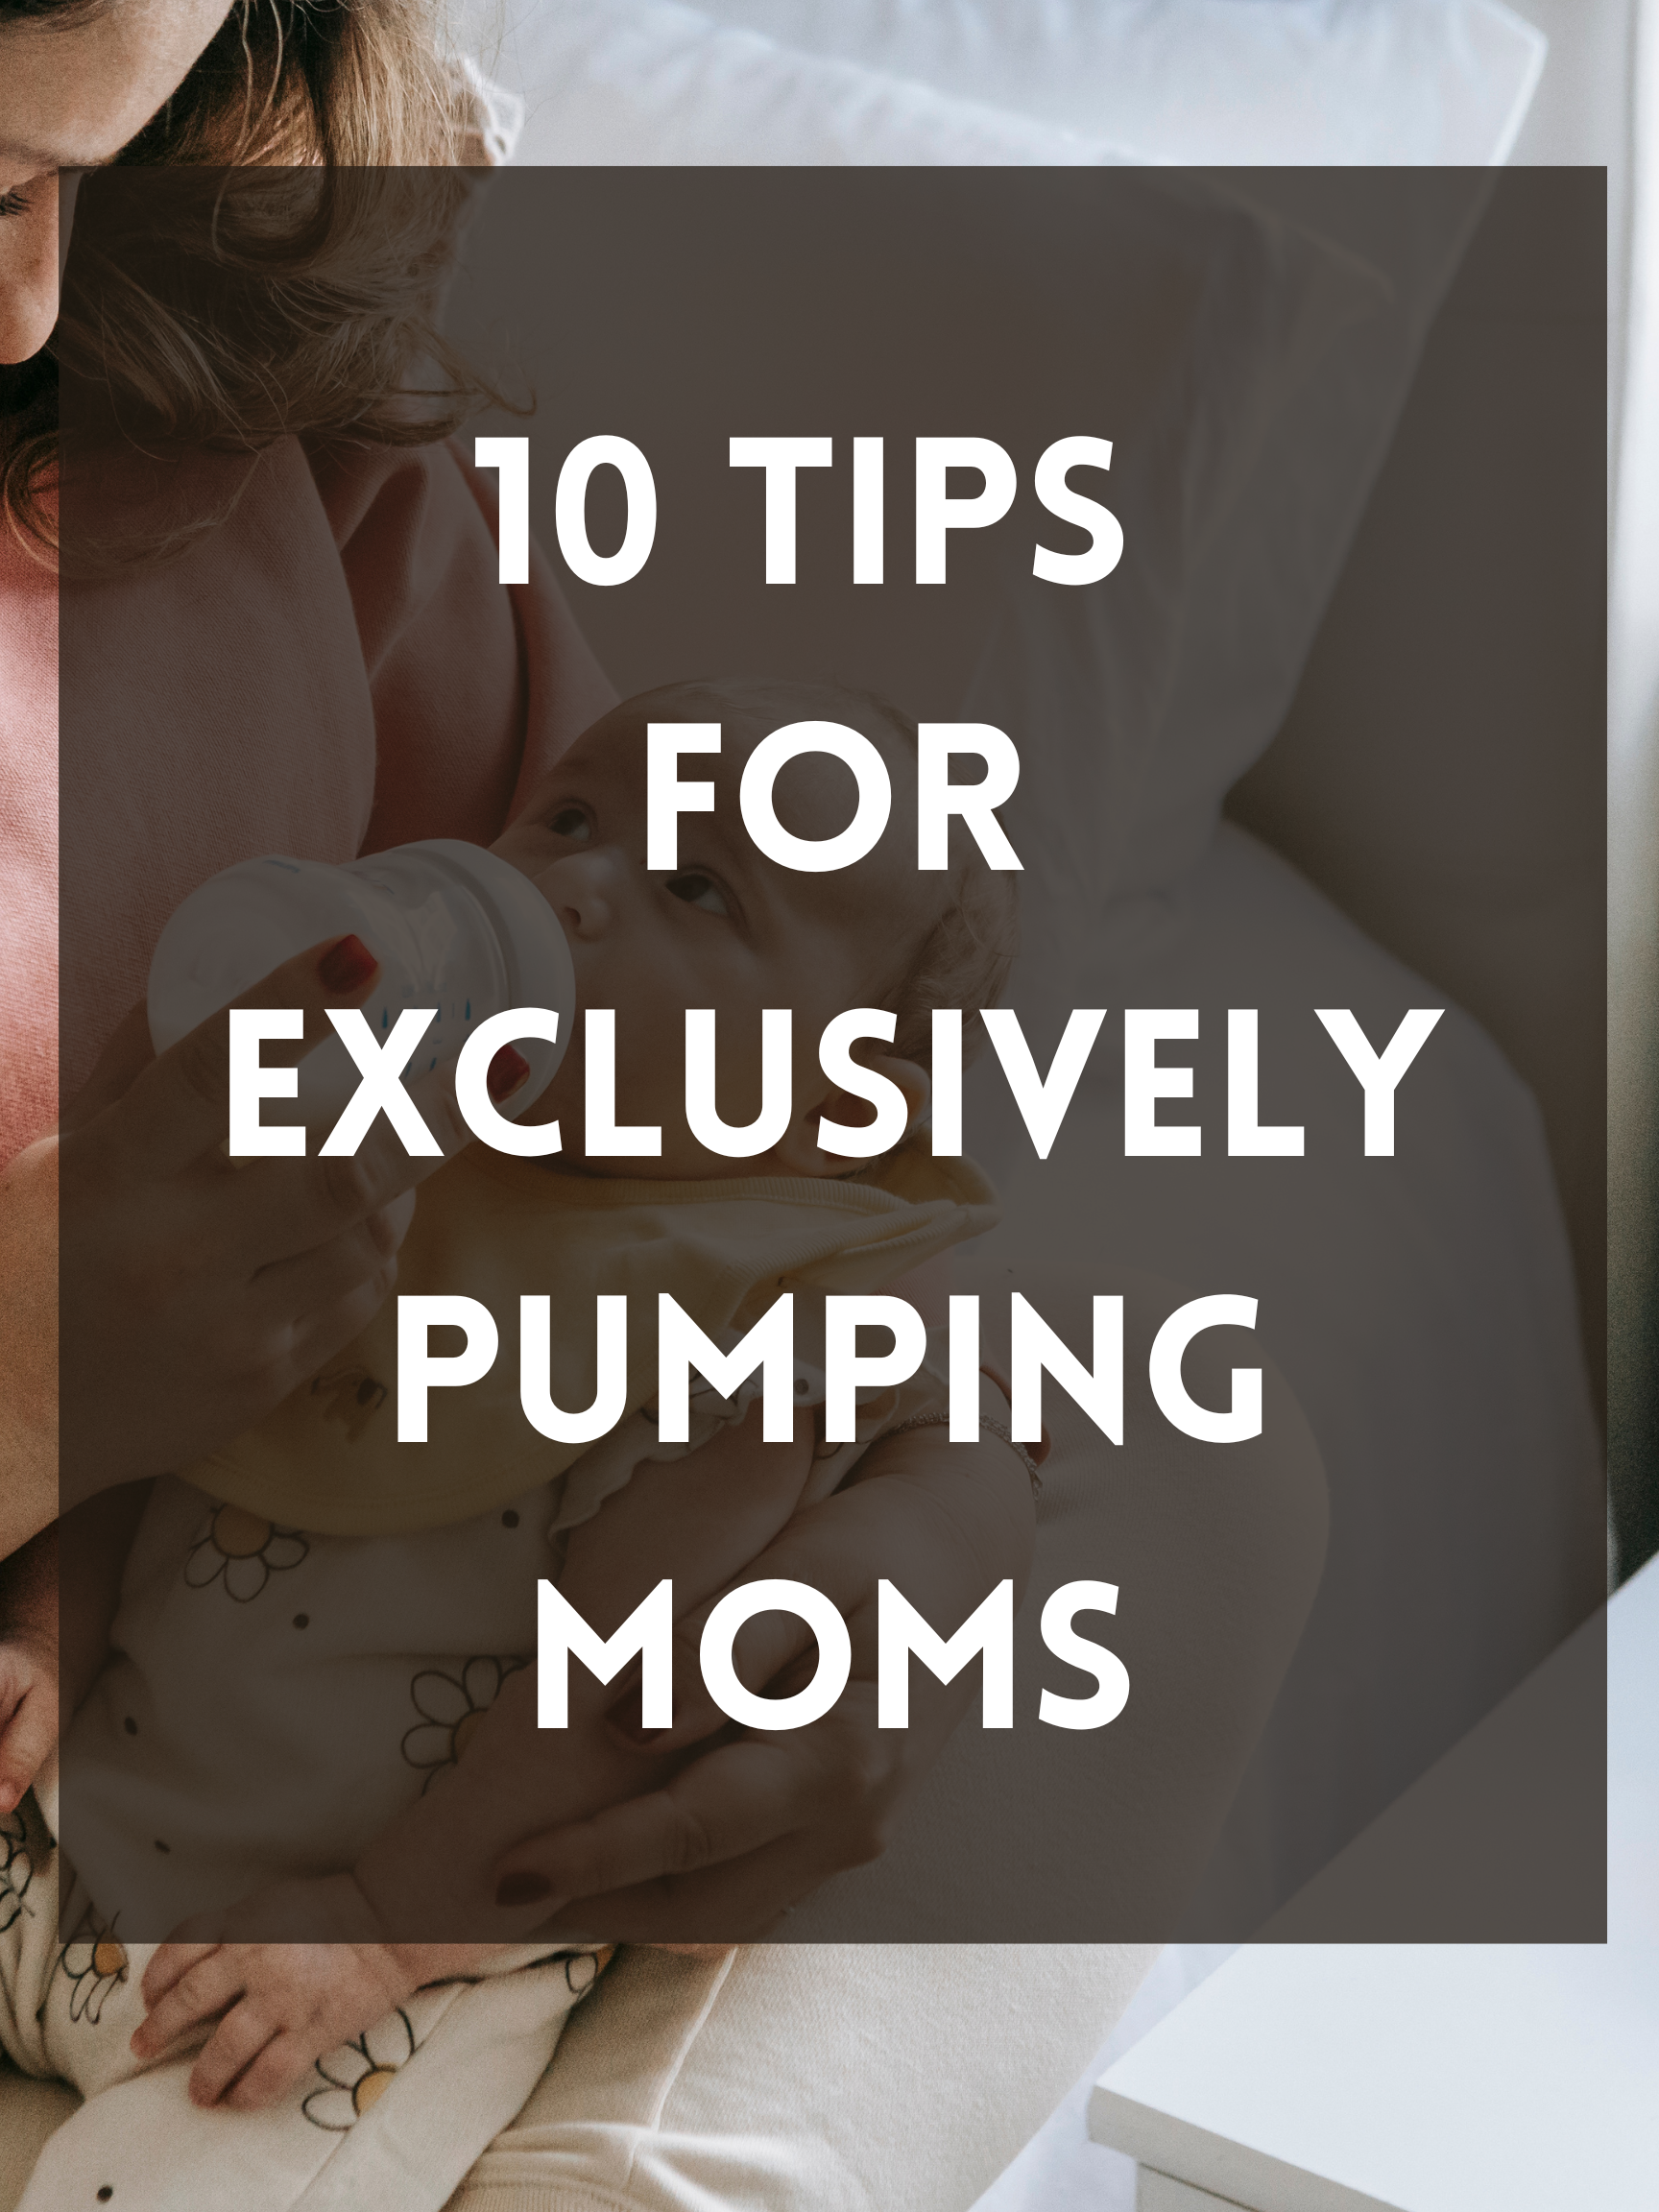 10 Tips for Exclusively Pumping Moms